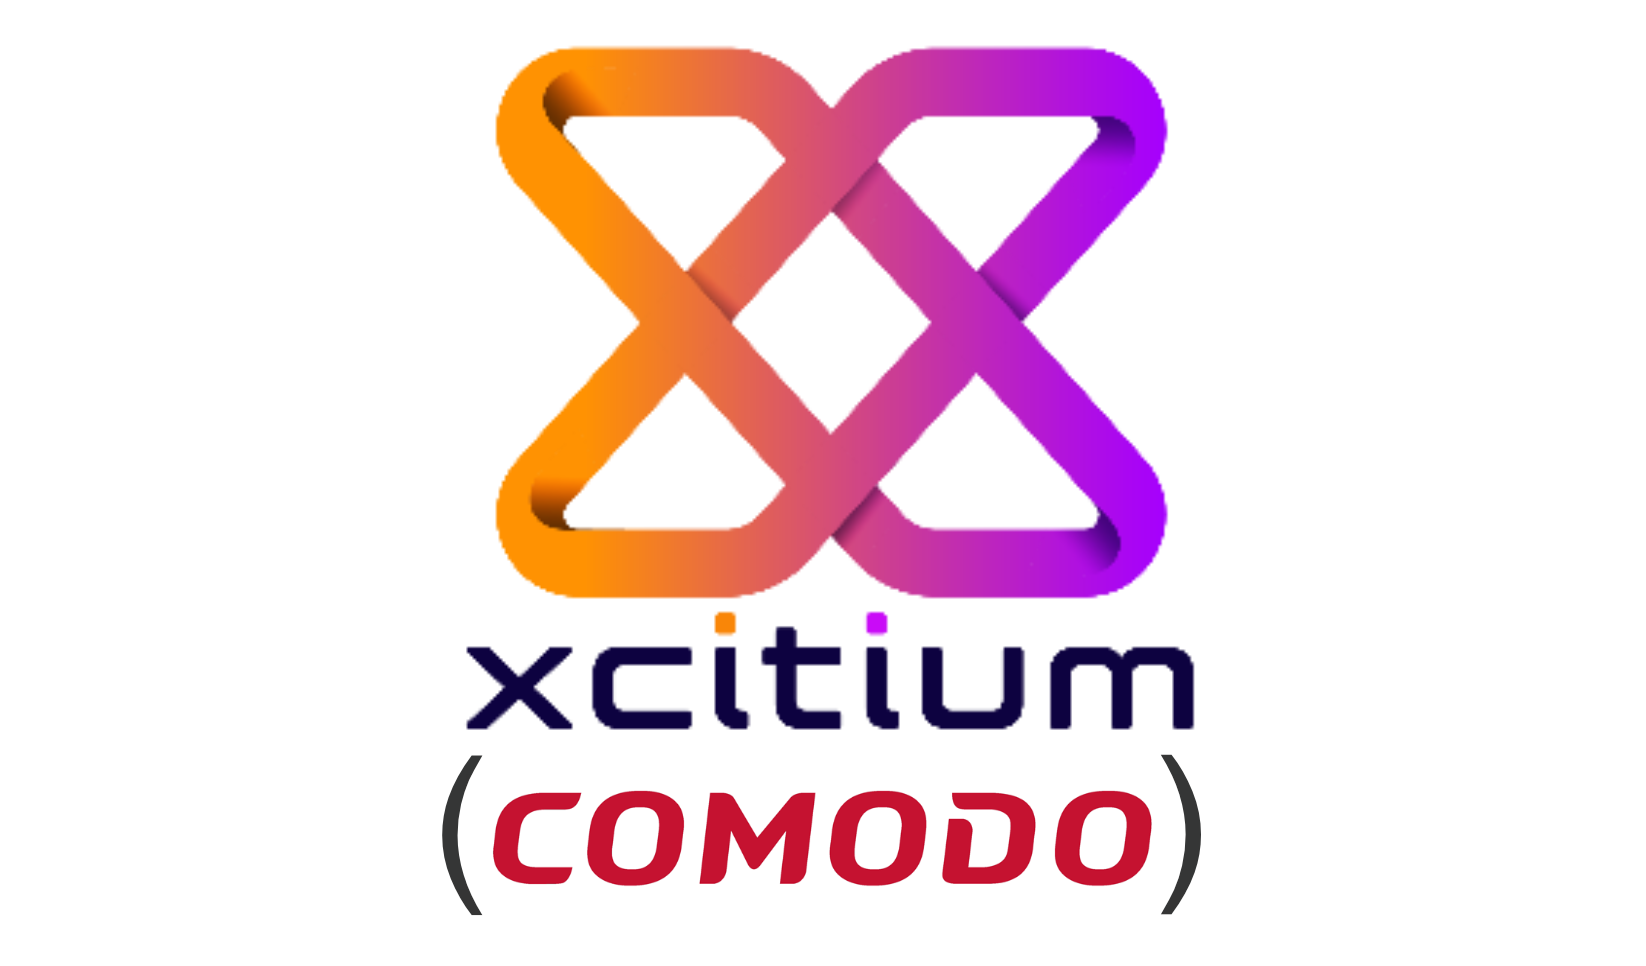 Xcitium (Comodo) Endpoint Protection